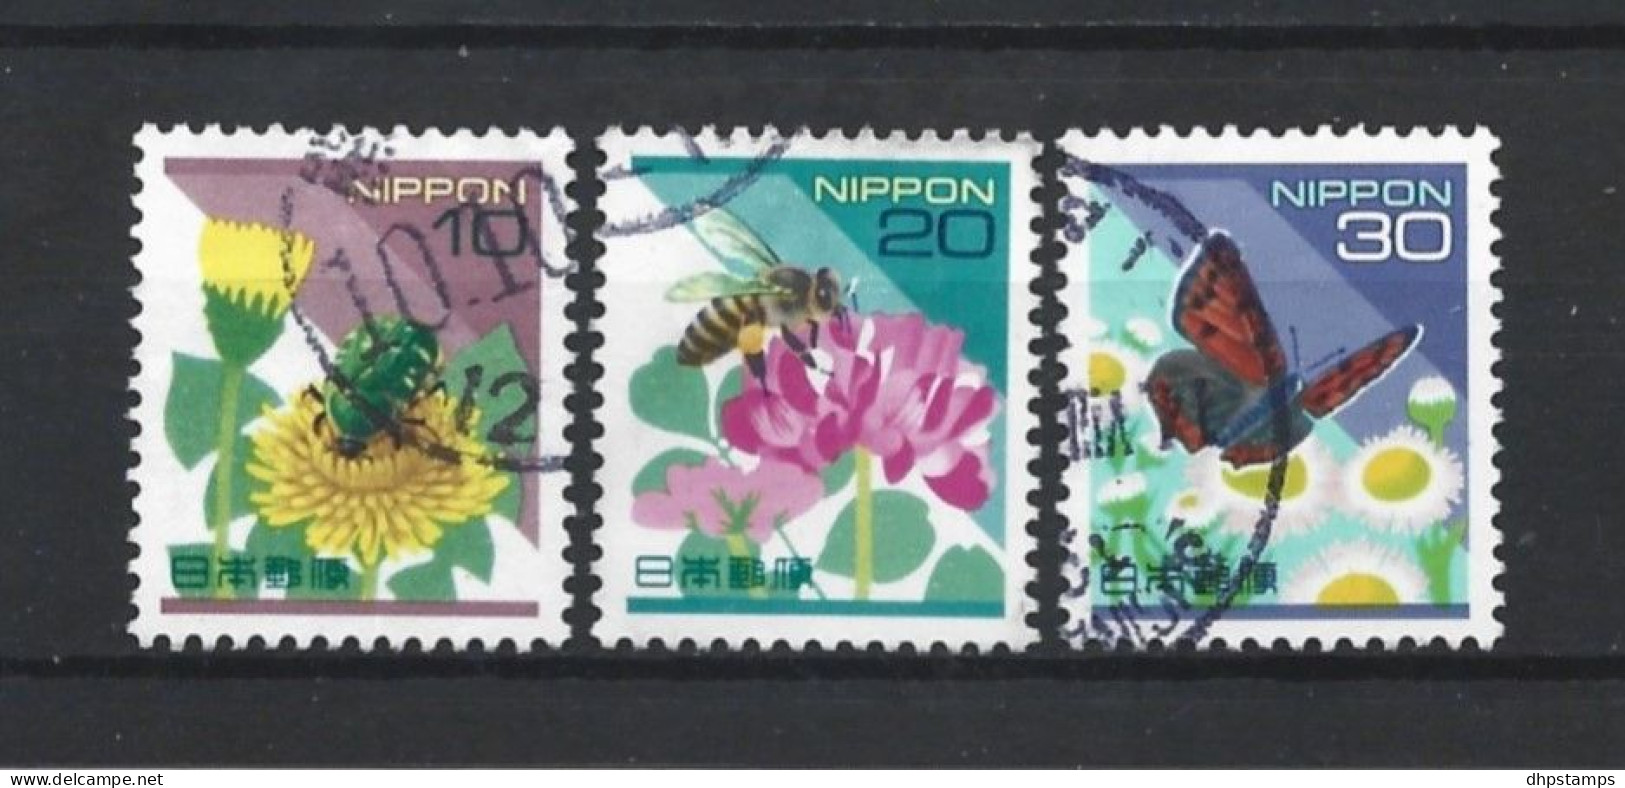 Japan 1997 Insects Y.T. 2388/2390 (0) - Usados